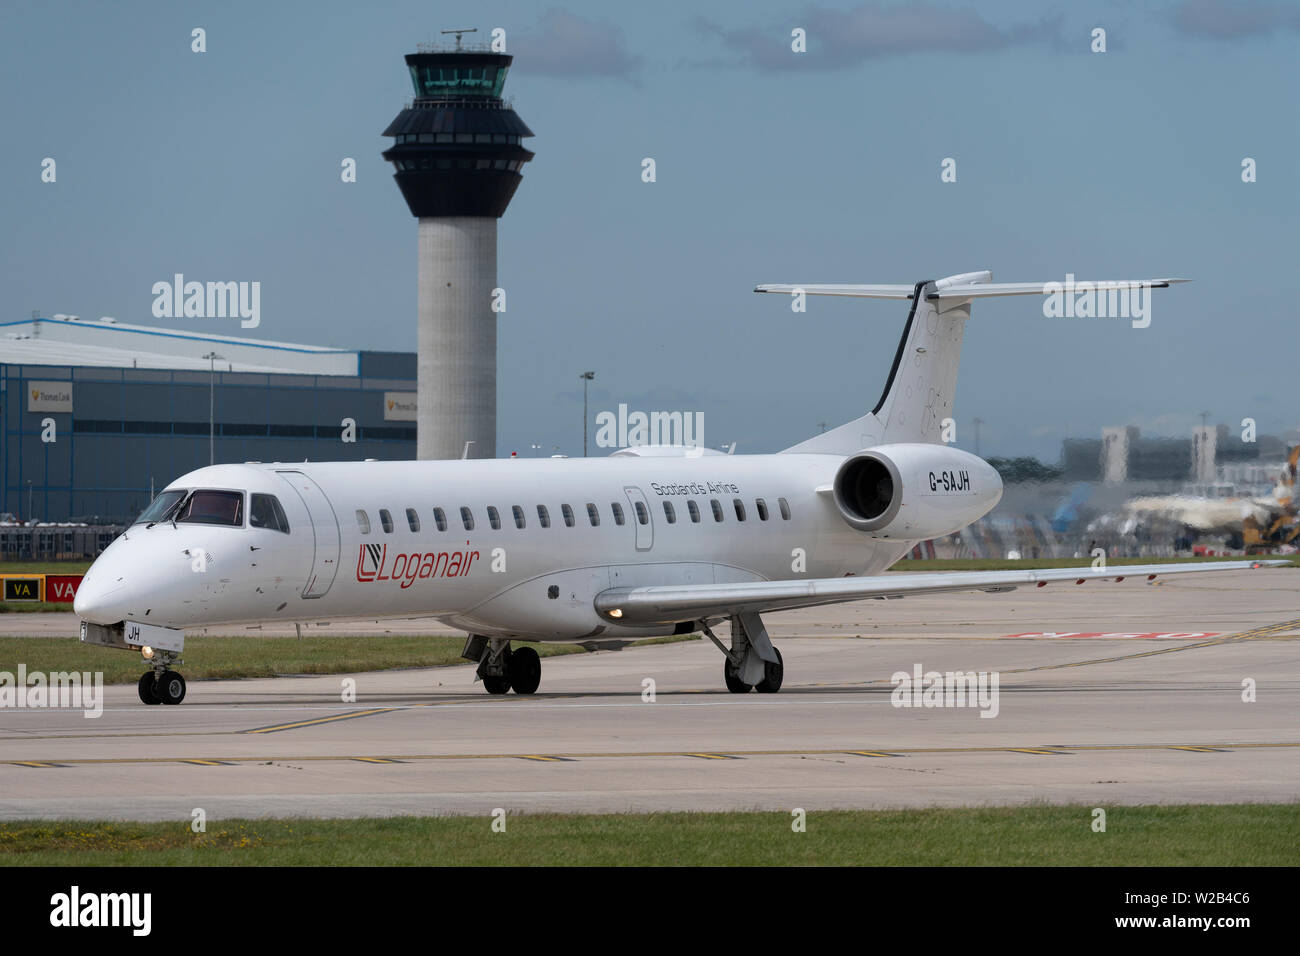 A Loganair Embraer ERJ-145EU taxis on the runway at Manchester Airport, UK. Stock Photo